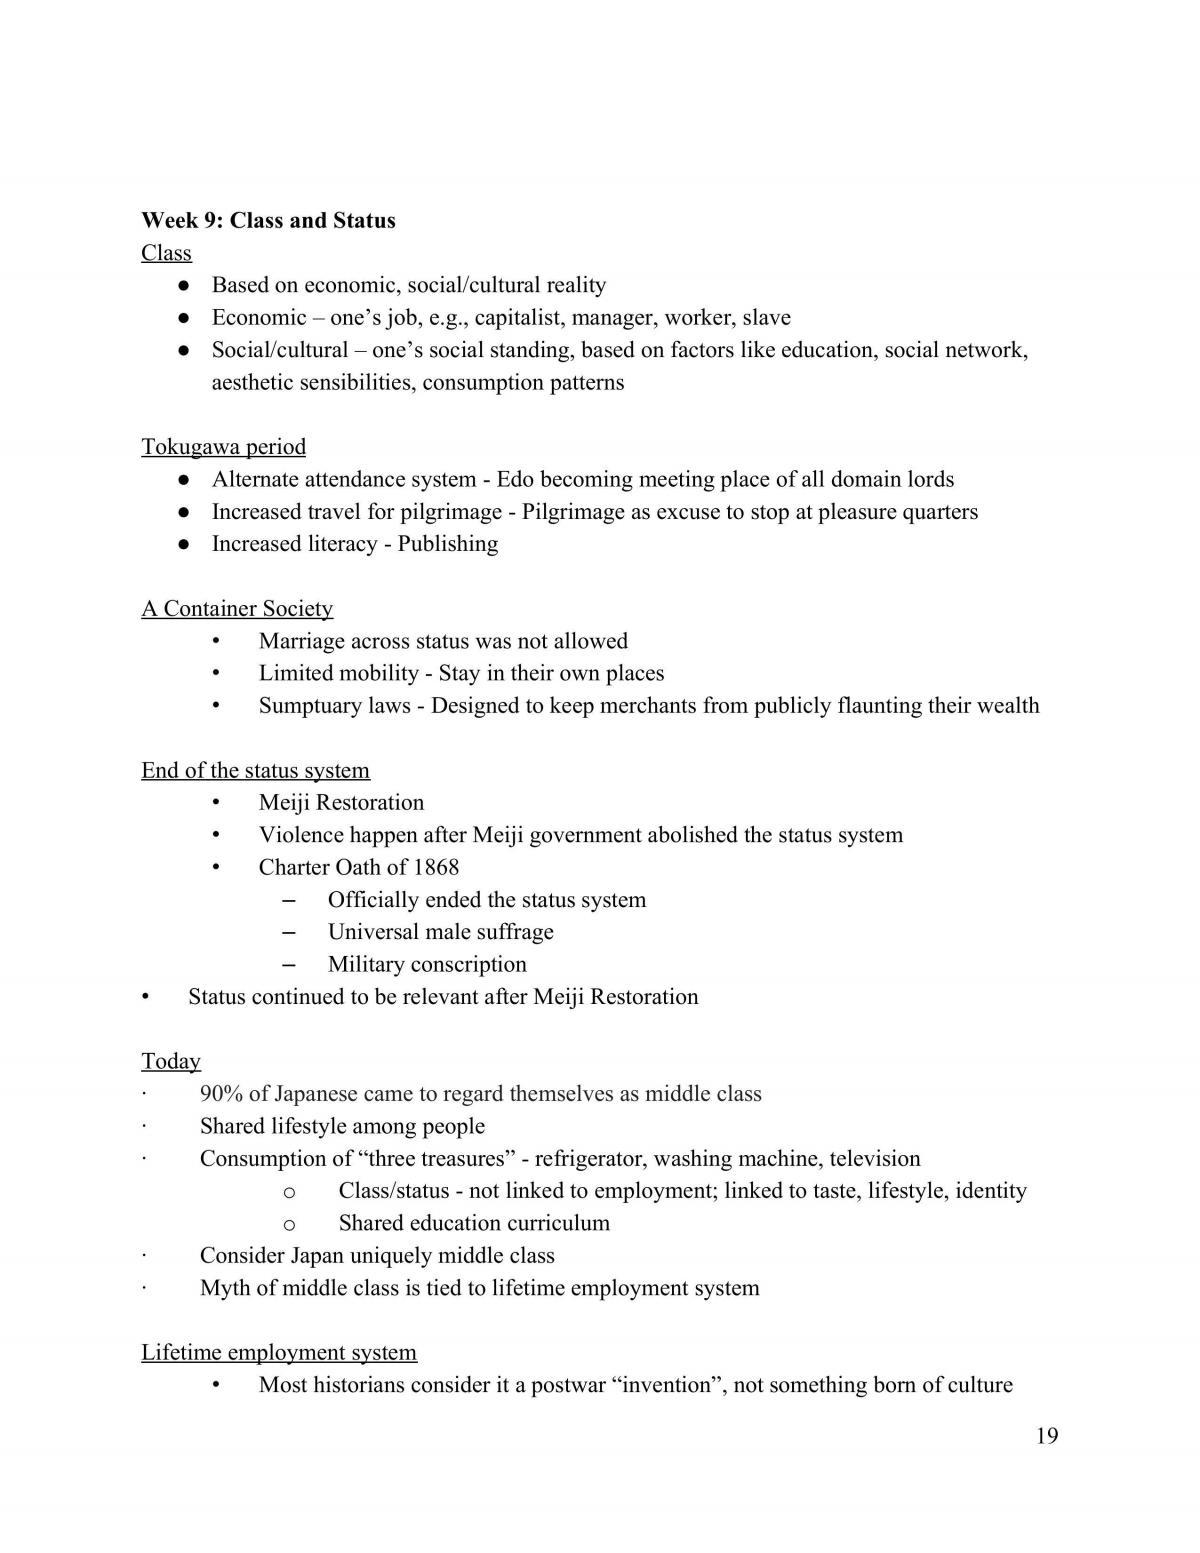 JS1101E Introduction to Japanese Studies Notes - Page 19